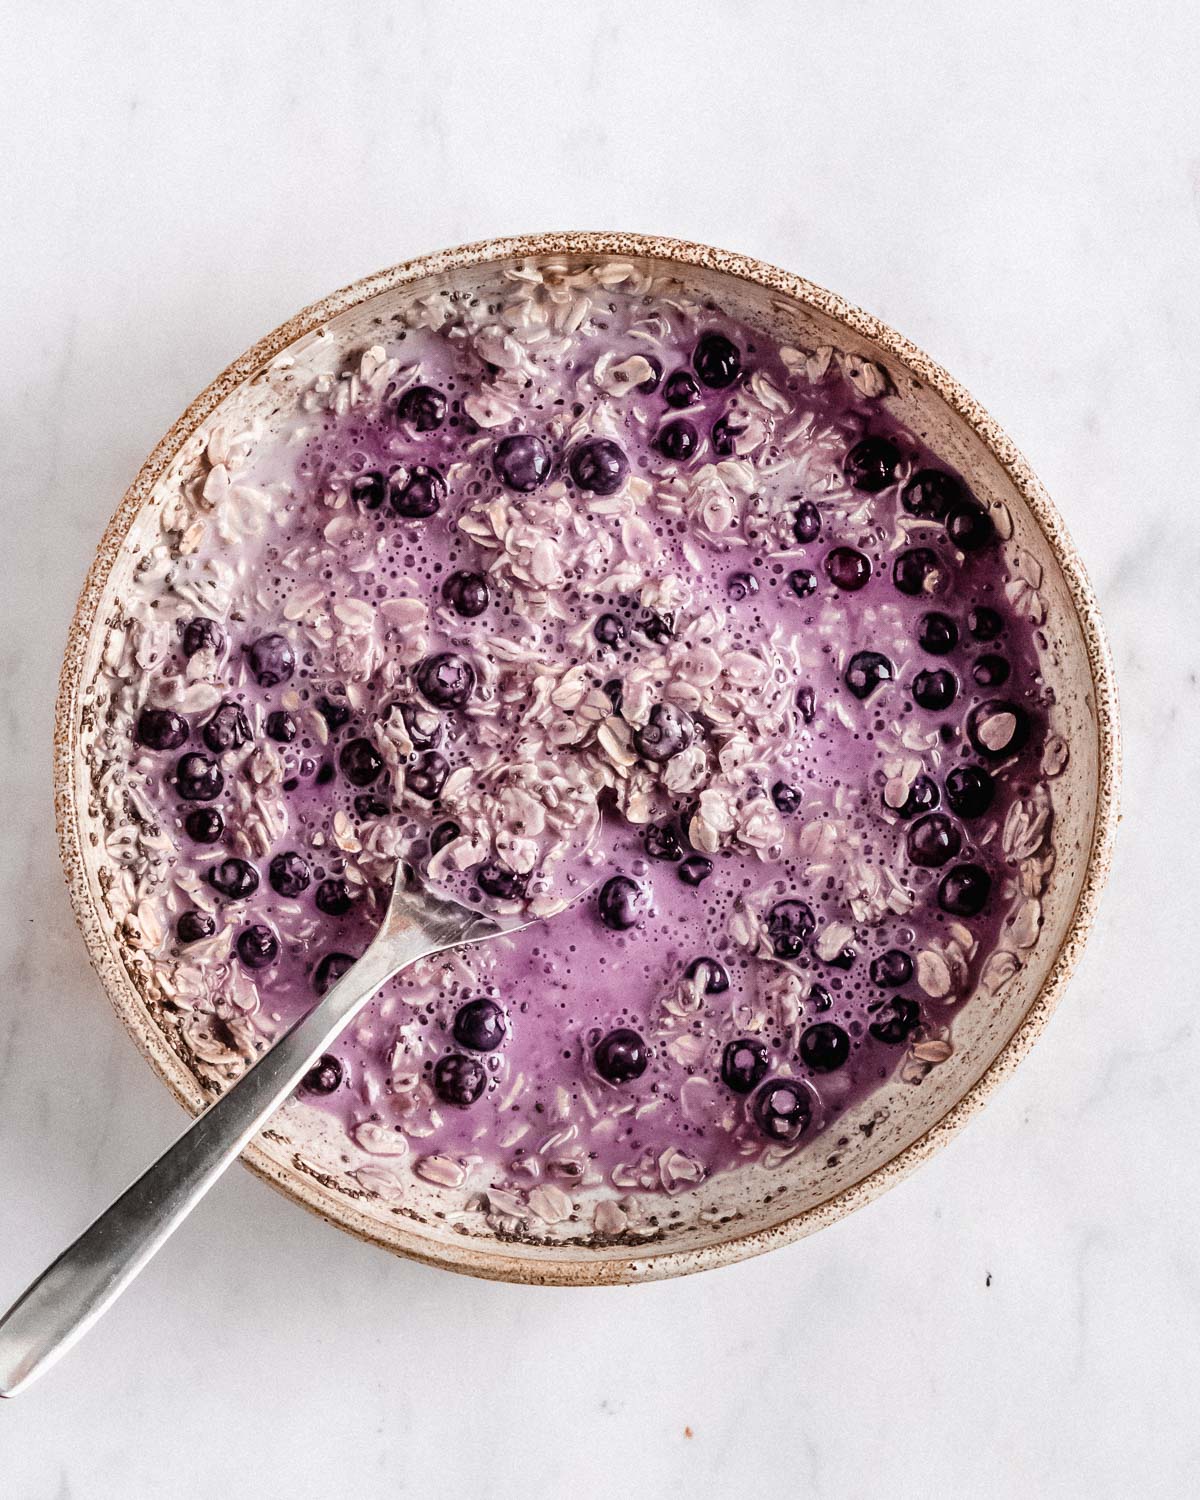 plant milk, yogurt, rolled oats, chia seeds, maple syrup and frozen berries in a granola bowl mixed together.